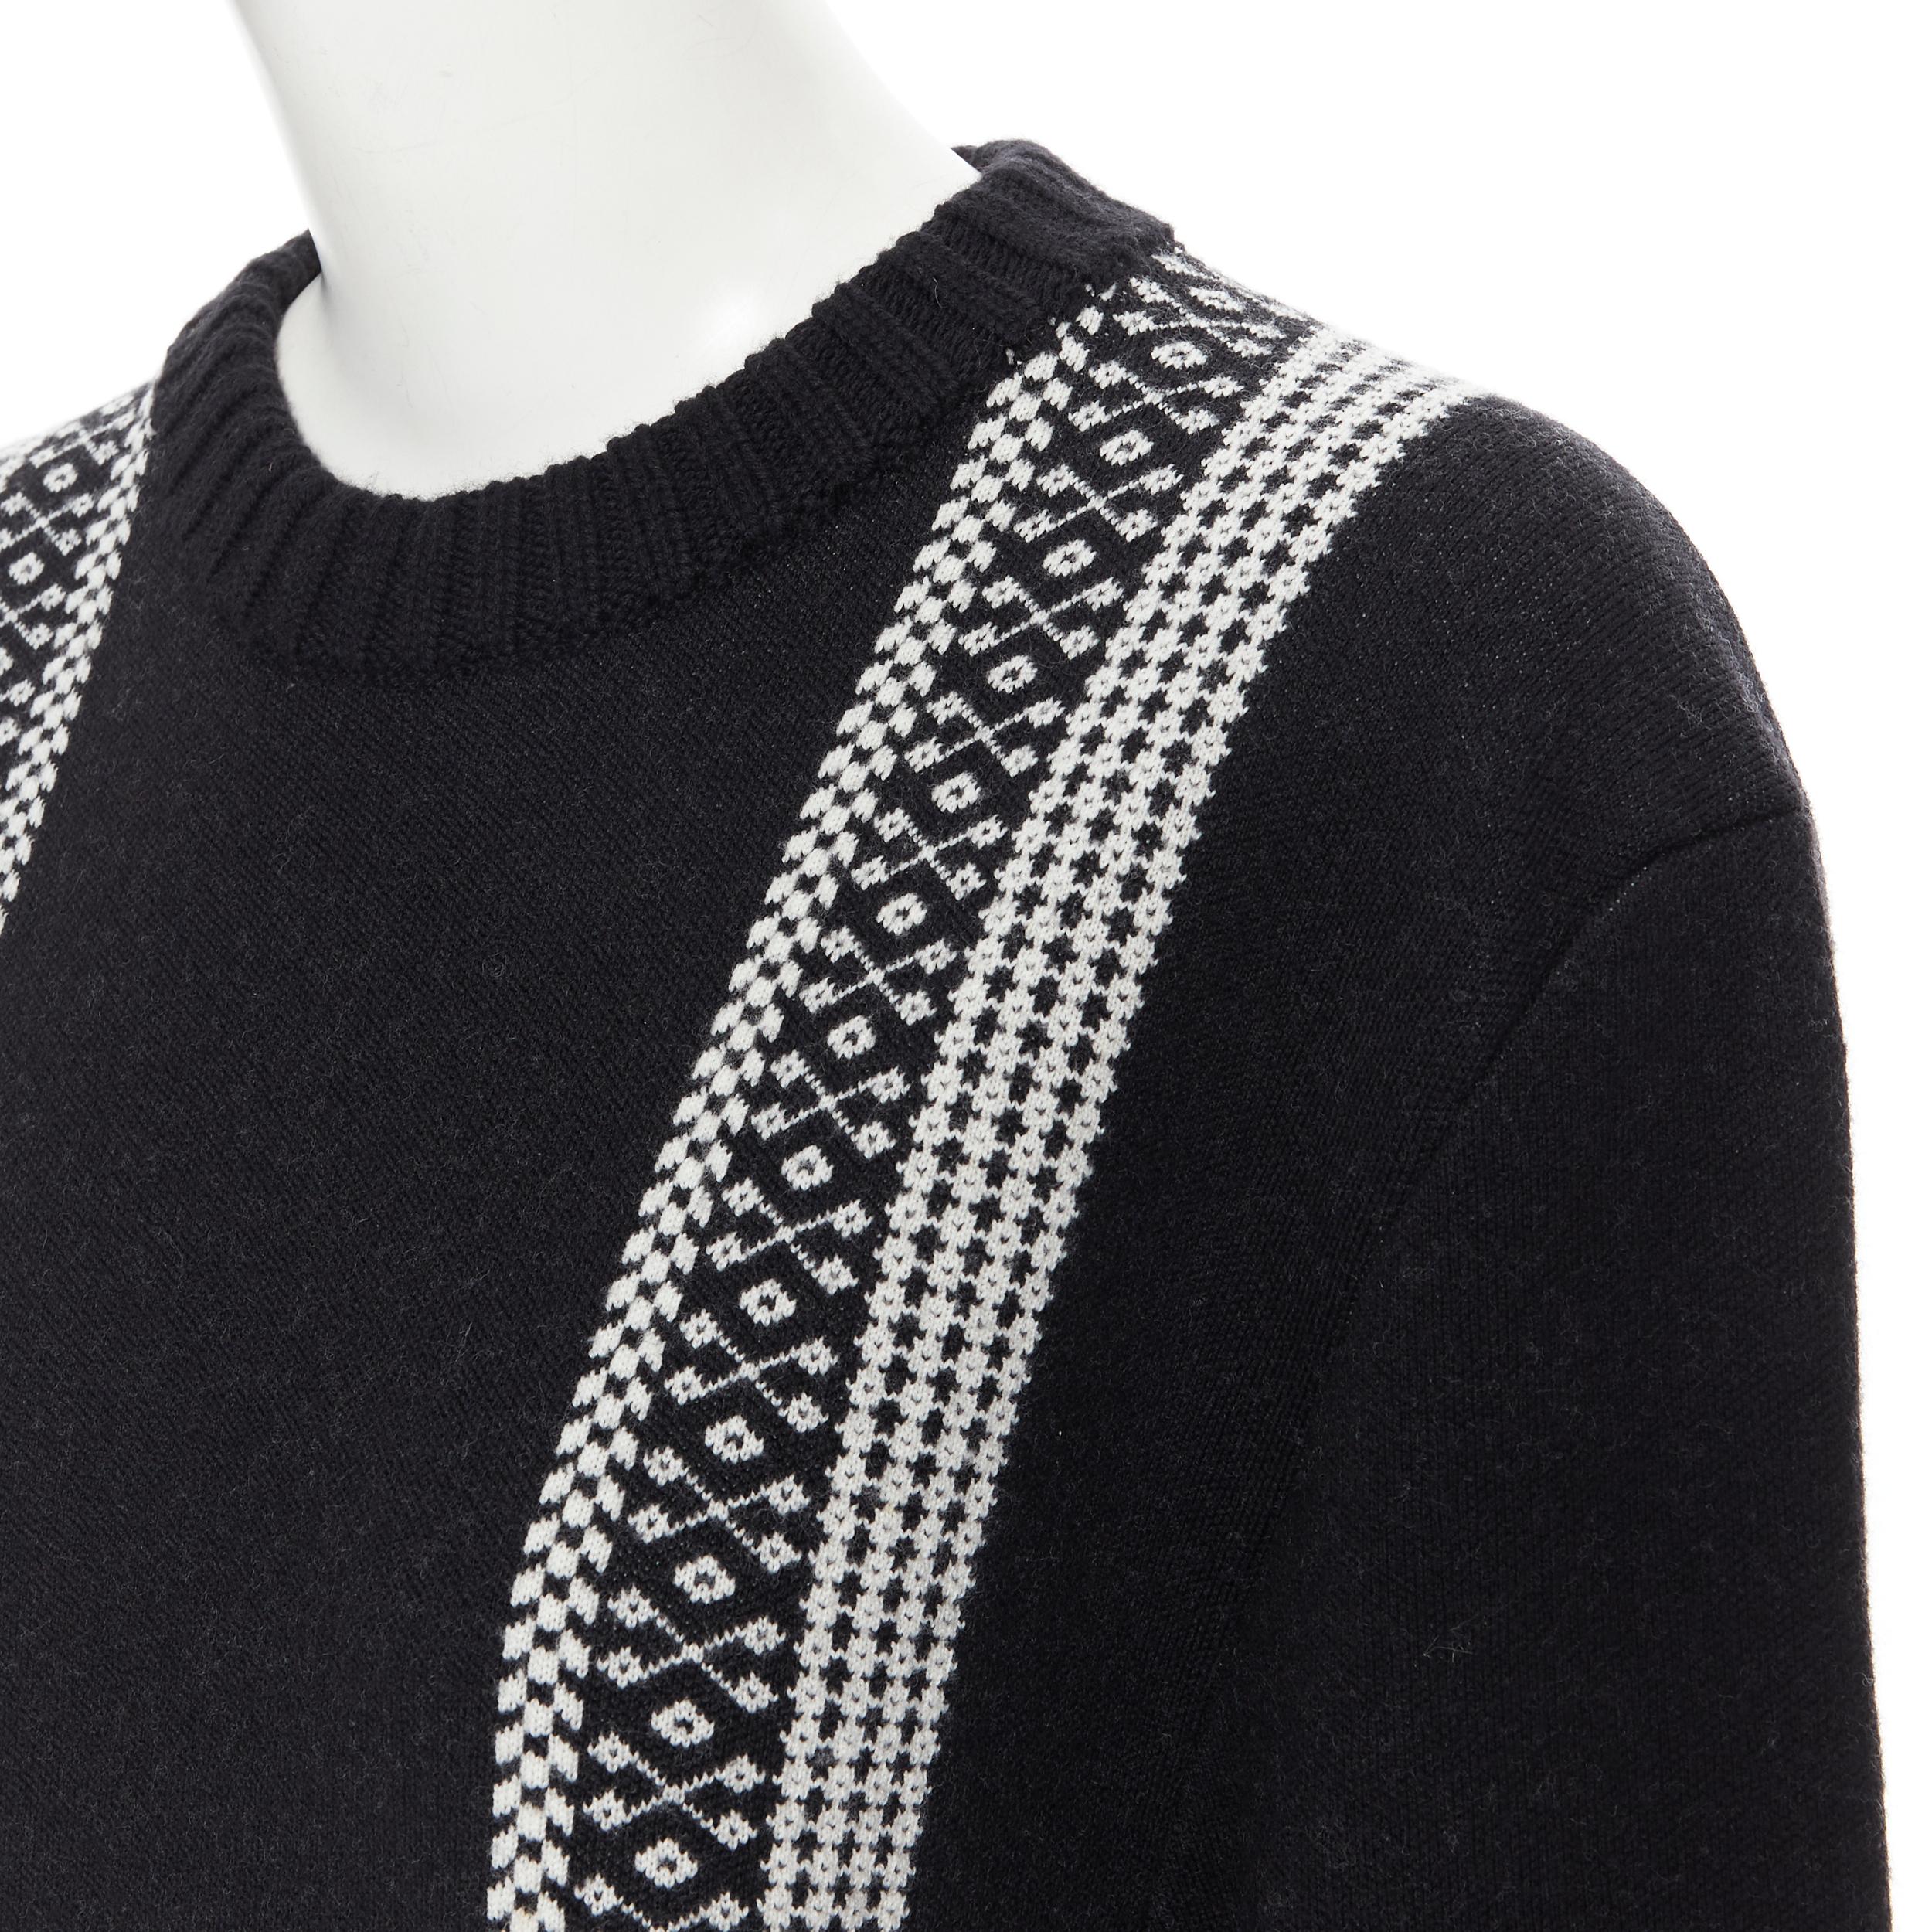 CHLOE 100% wool black white intarsia woven long sleeve sweater pullover XS For Sale 1